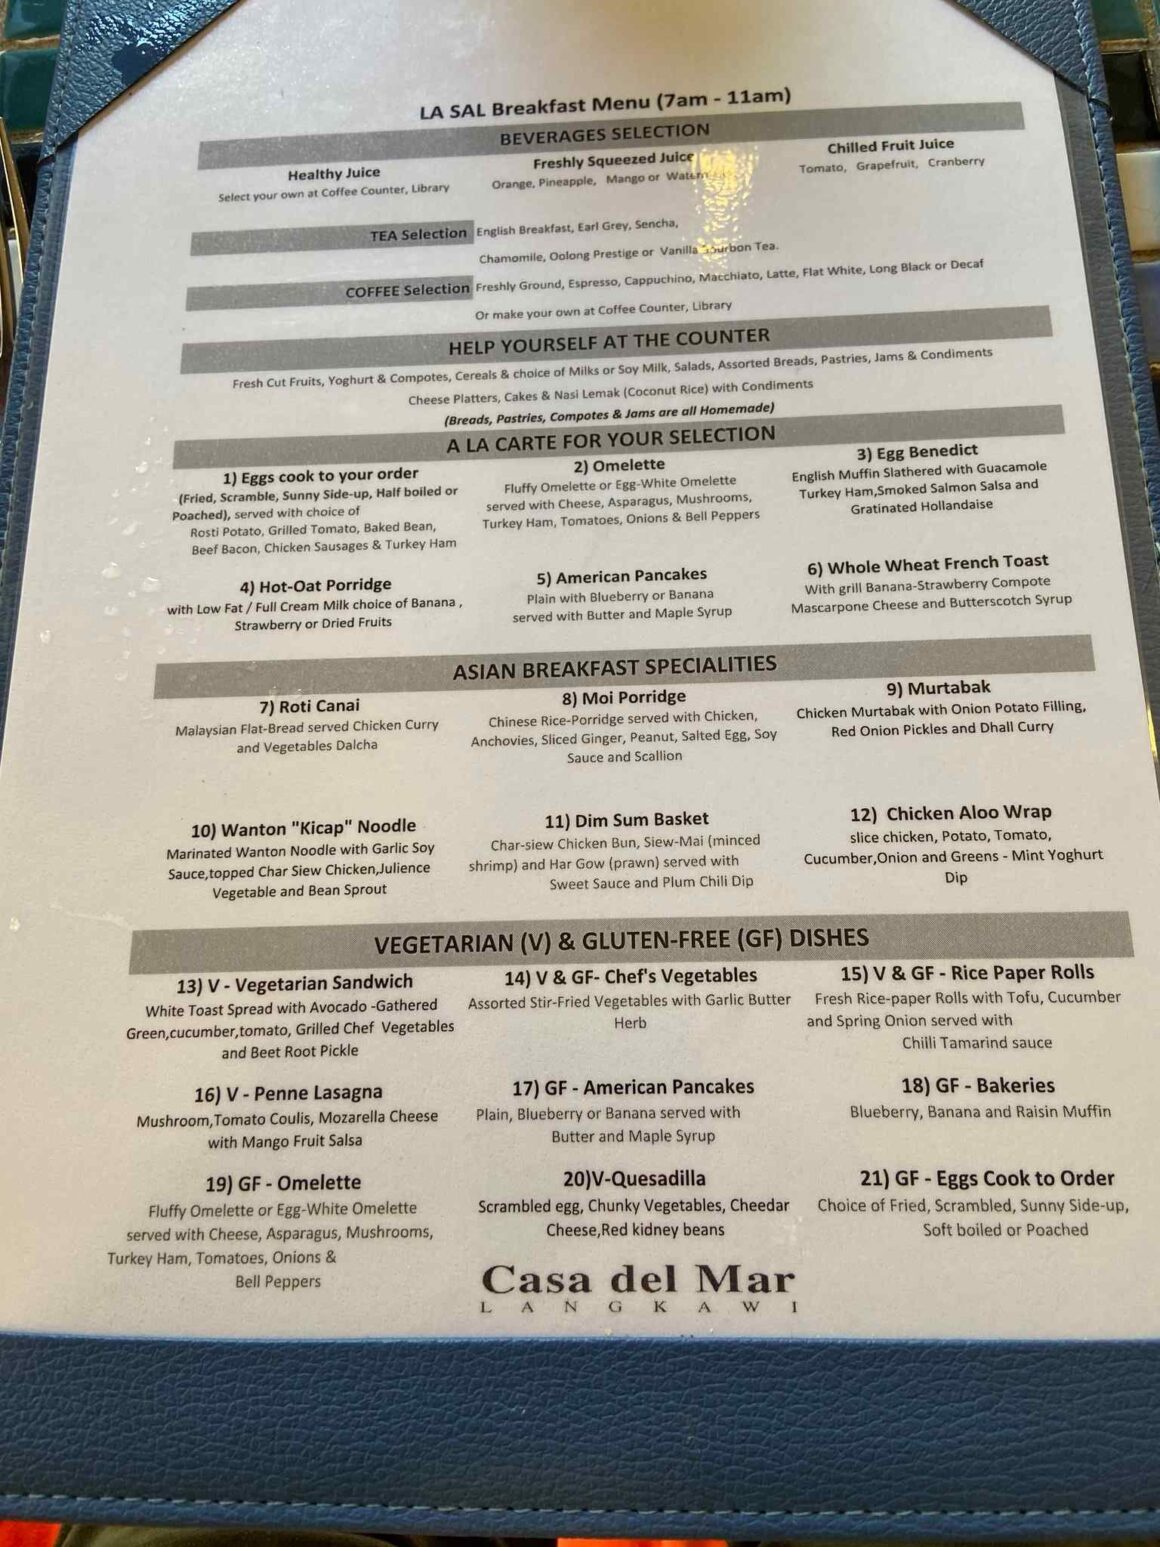 This is a photo of the breakfast menu 